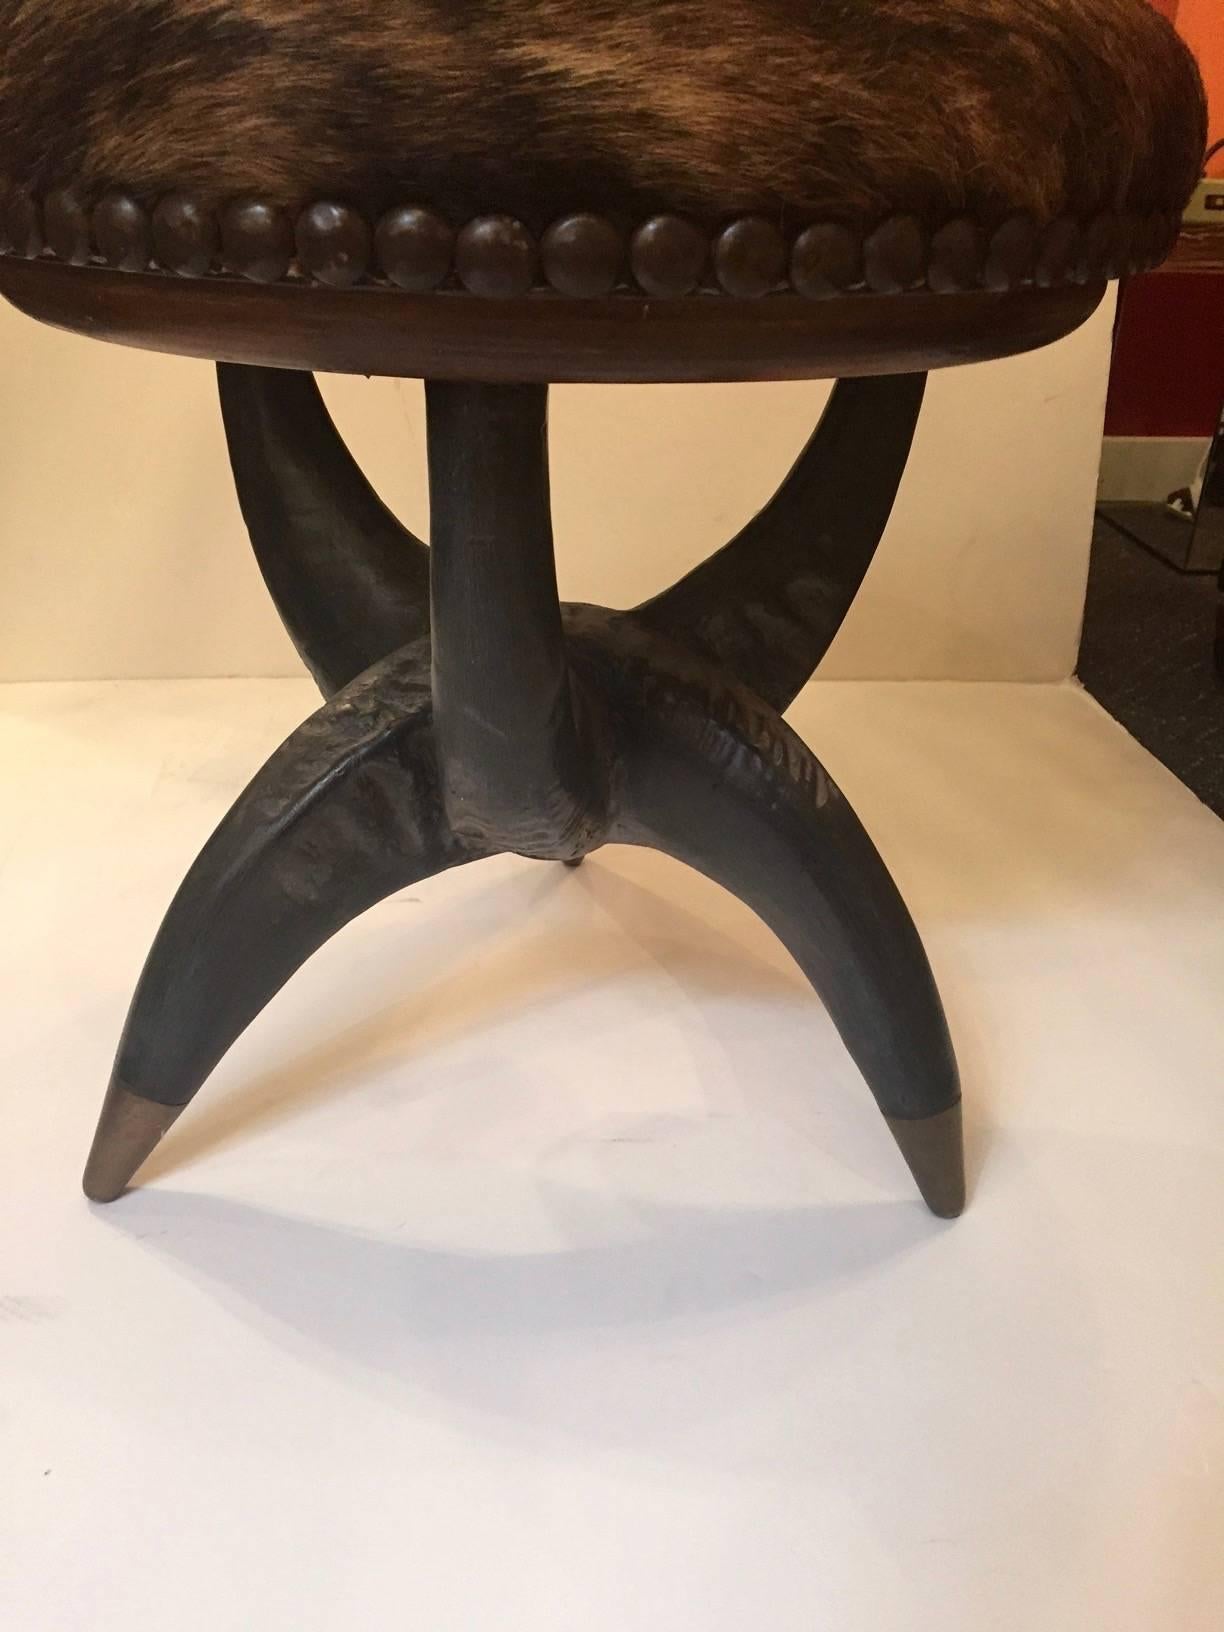 Great looking stool upholstered in light and dark brown cowhide with nailhead detailing and a cool grey black Horn base with brass caps.

RR